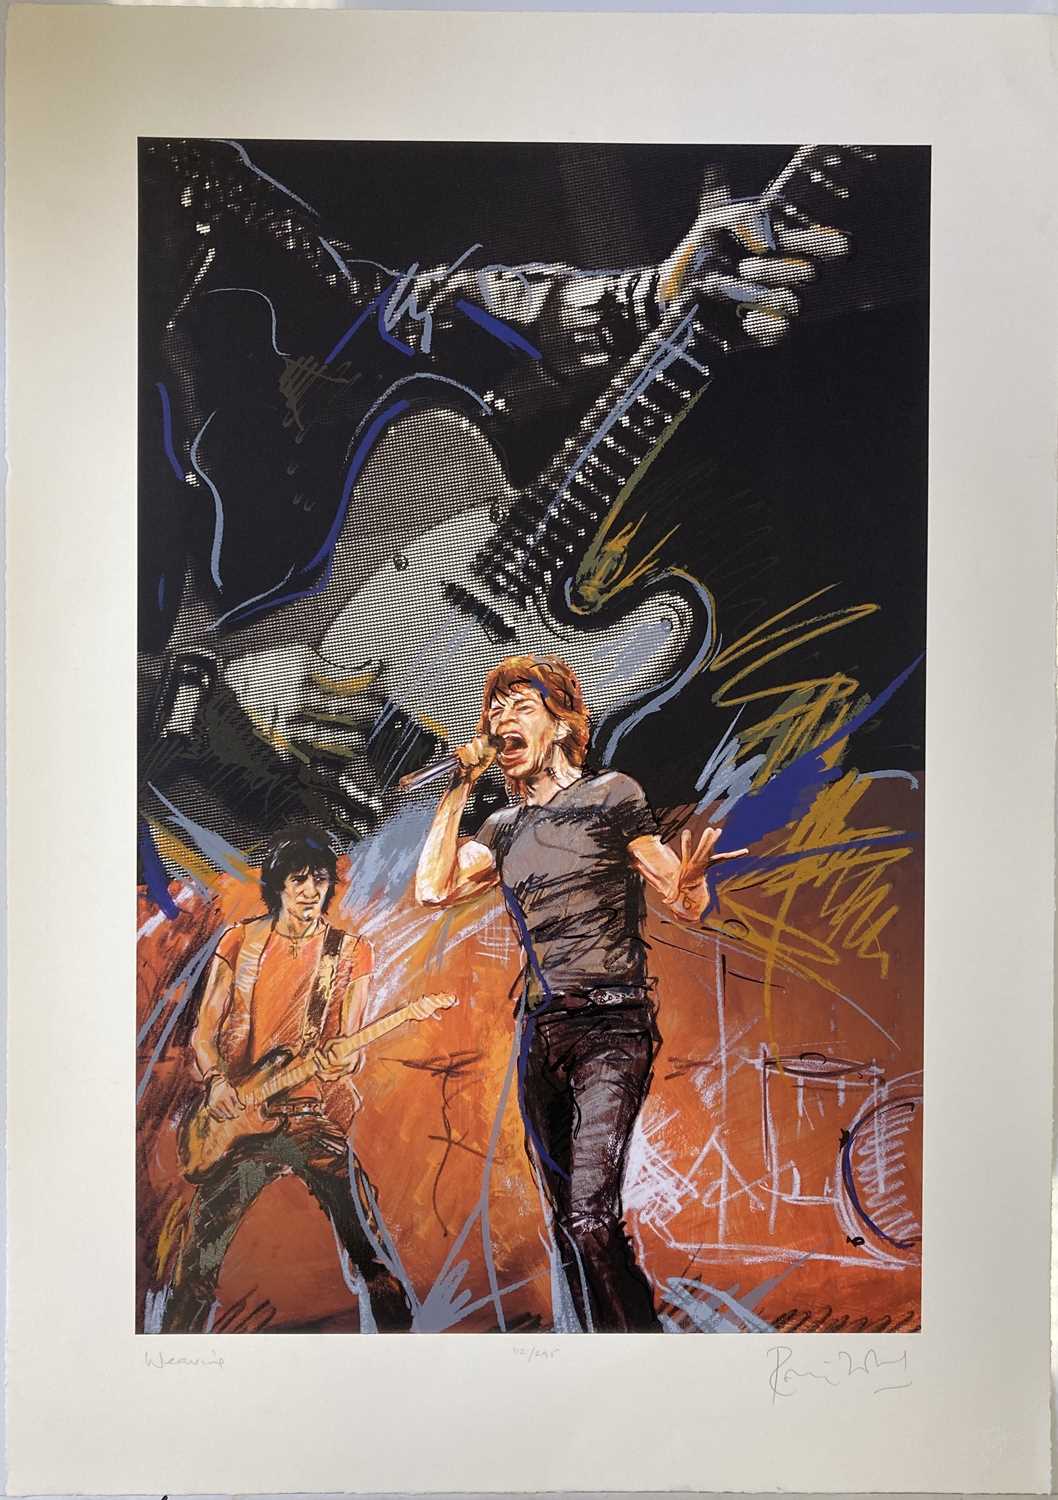 Lot 491 - RONNIE WOOD SIGNED PRINT - WEAVING.